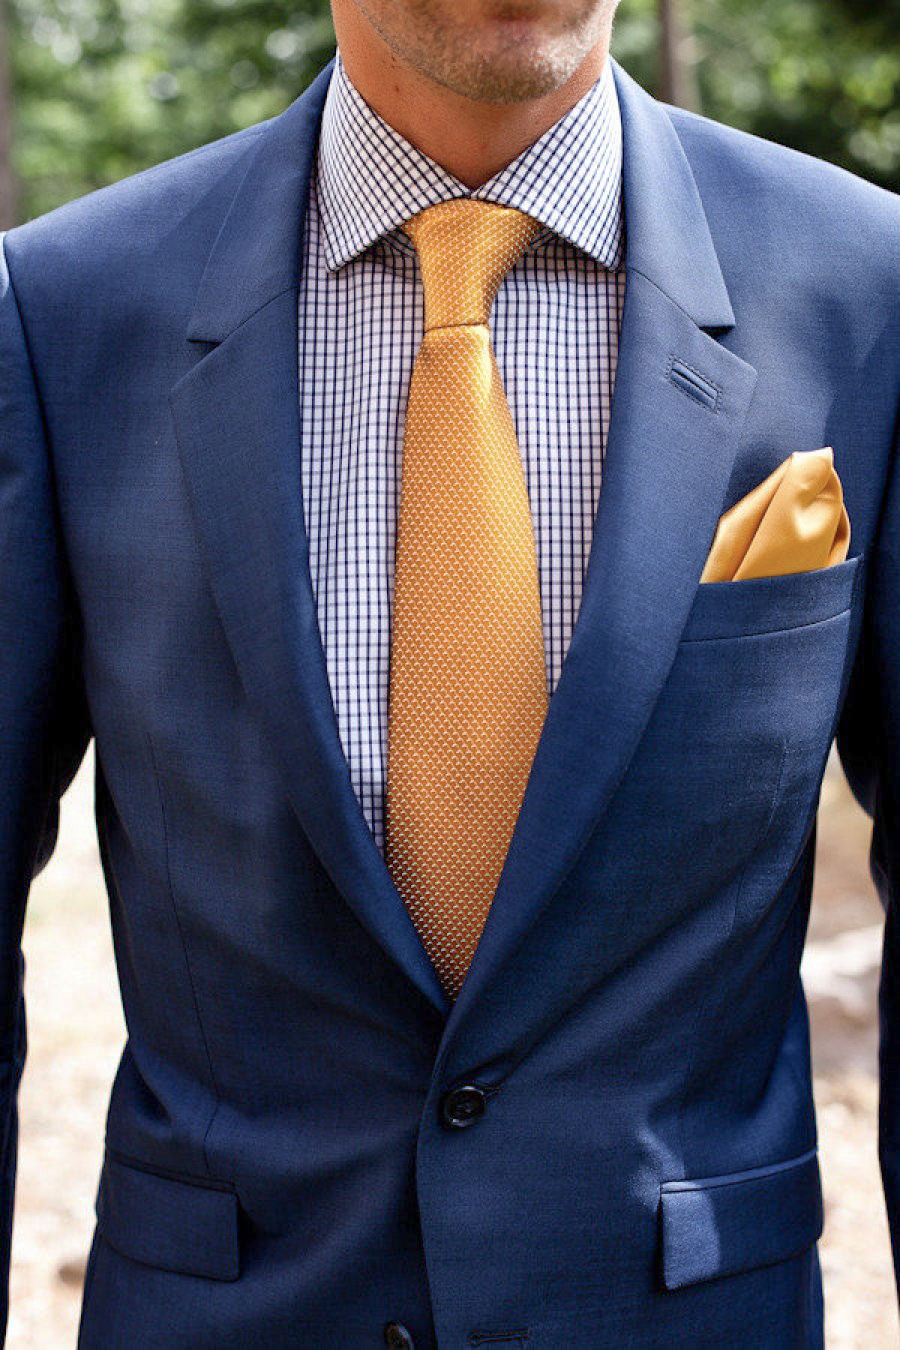 to Wear a Navy Suit: Color Combinations Shirt & Tie